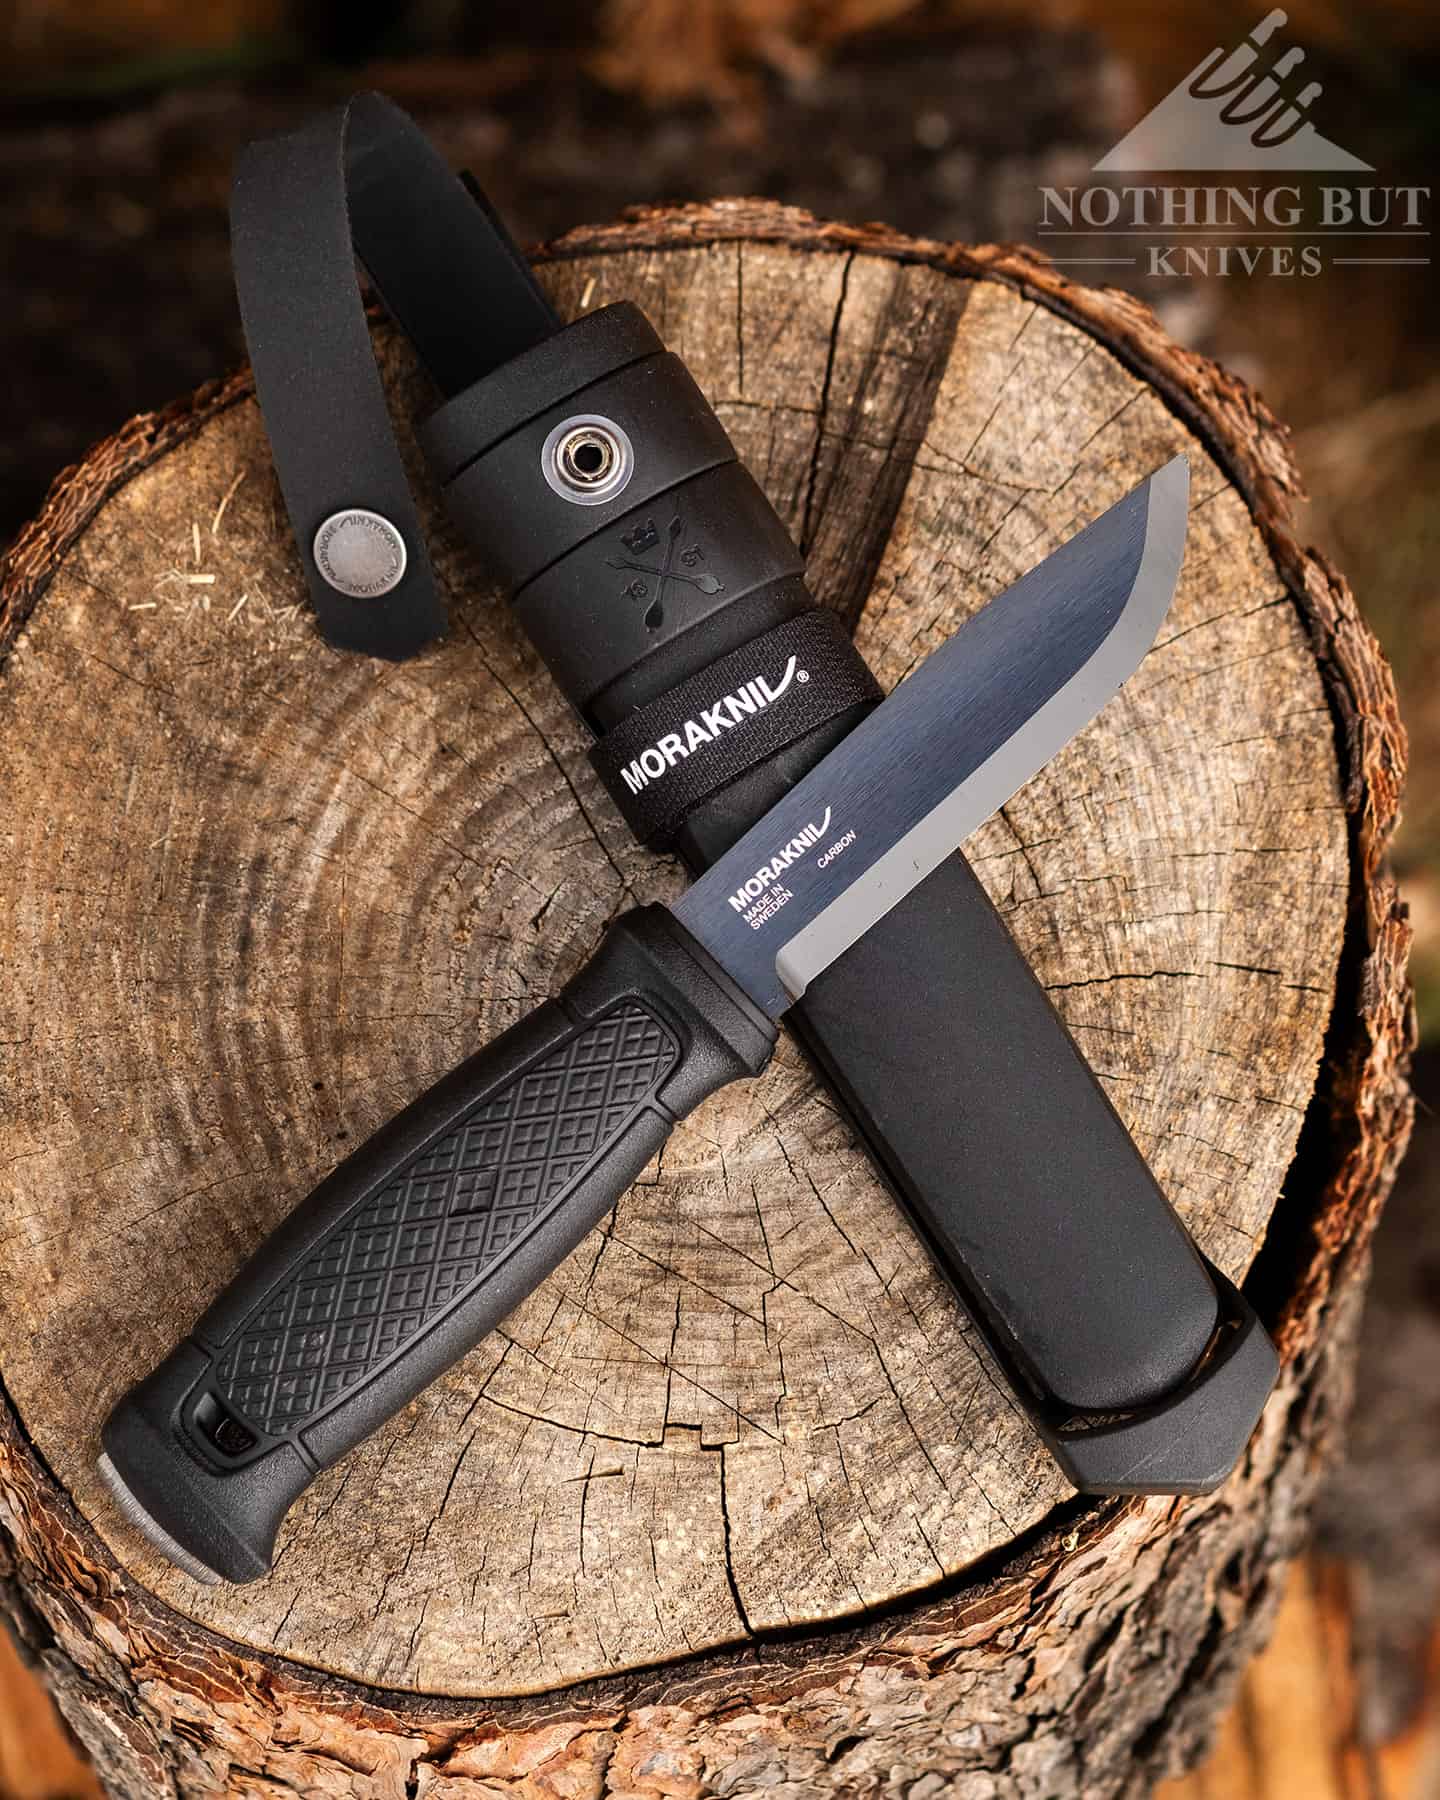 The Mora Garberg is one of the most popular bushcraft knives under $200, because it provides a lot of performance and quality at that price point. 